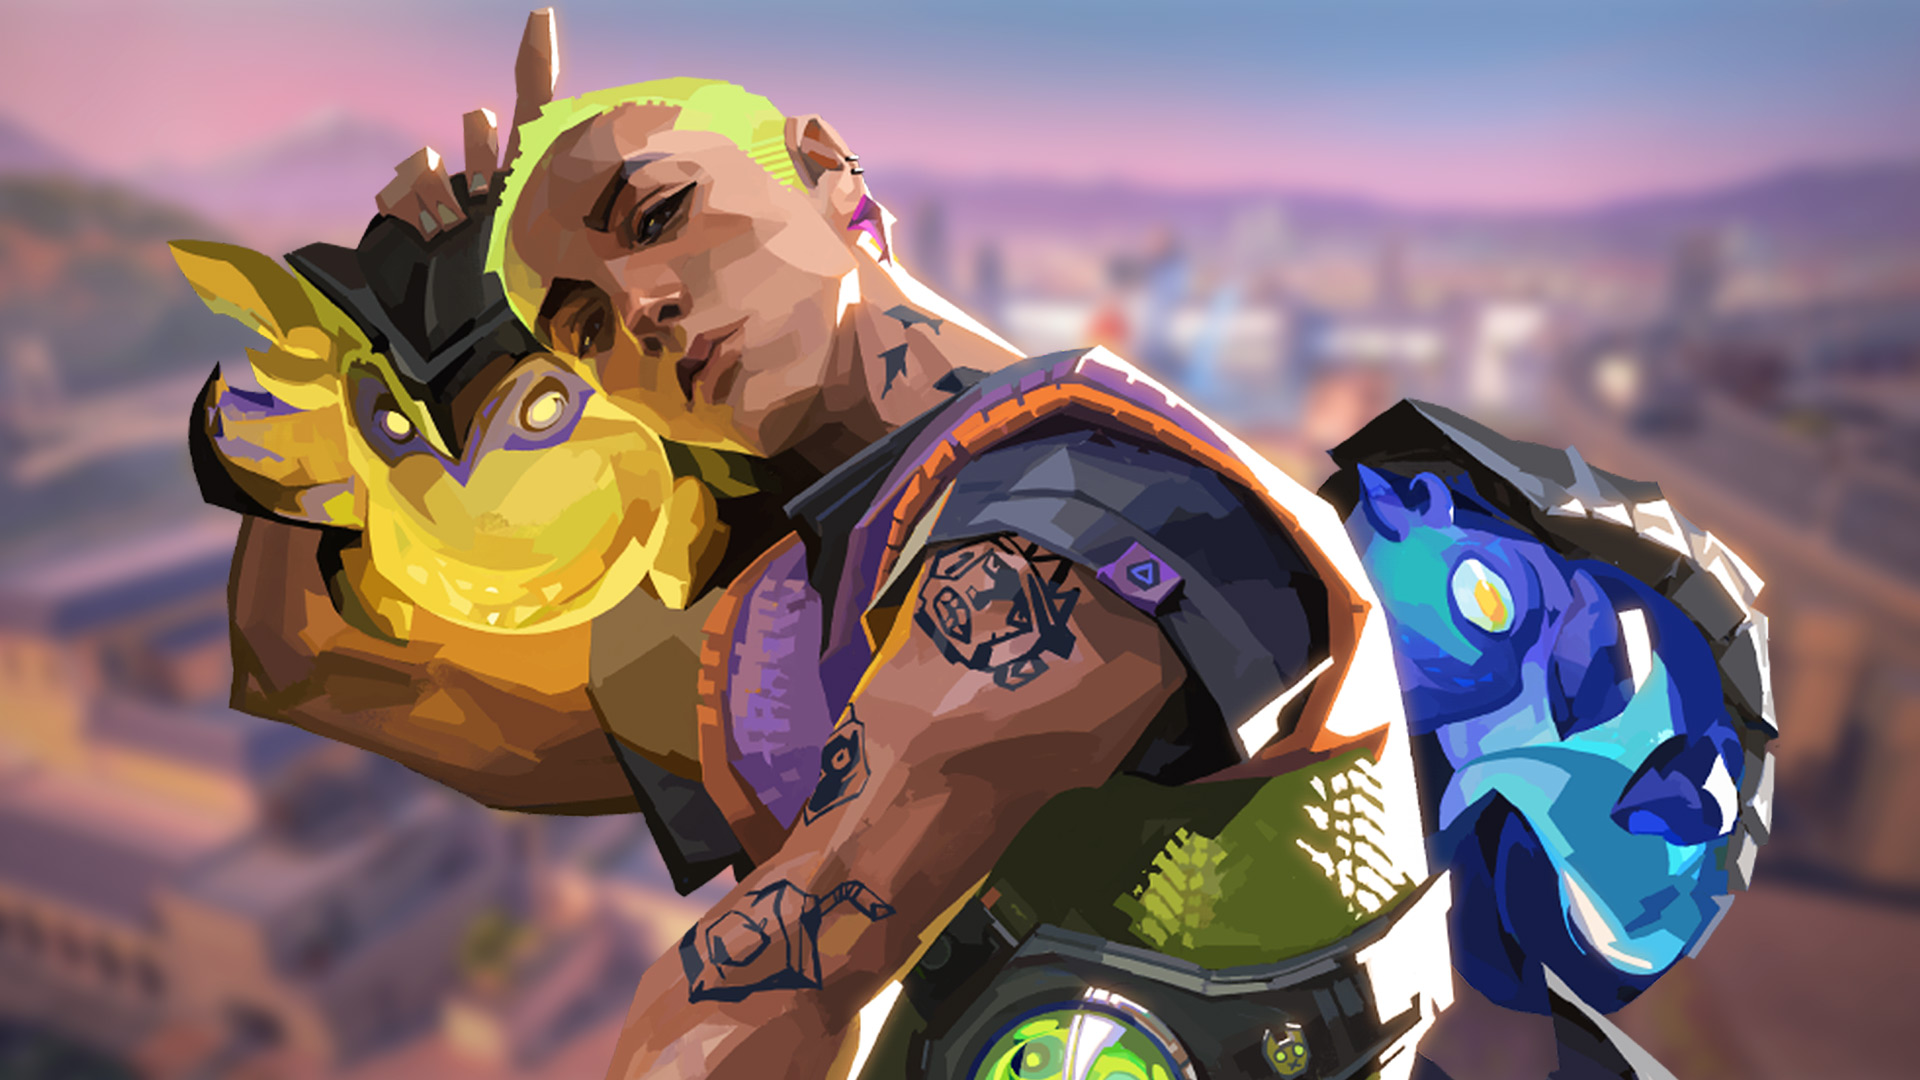 Sunset Overdrive gets new weapons pack, player voting and more